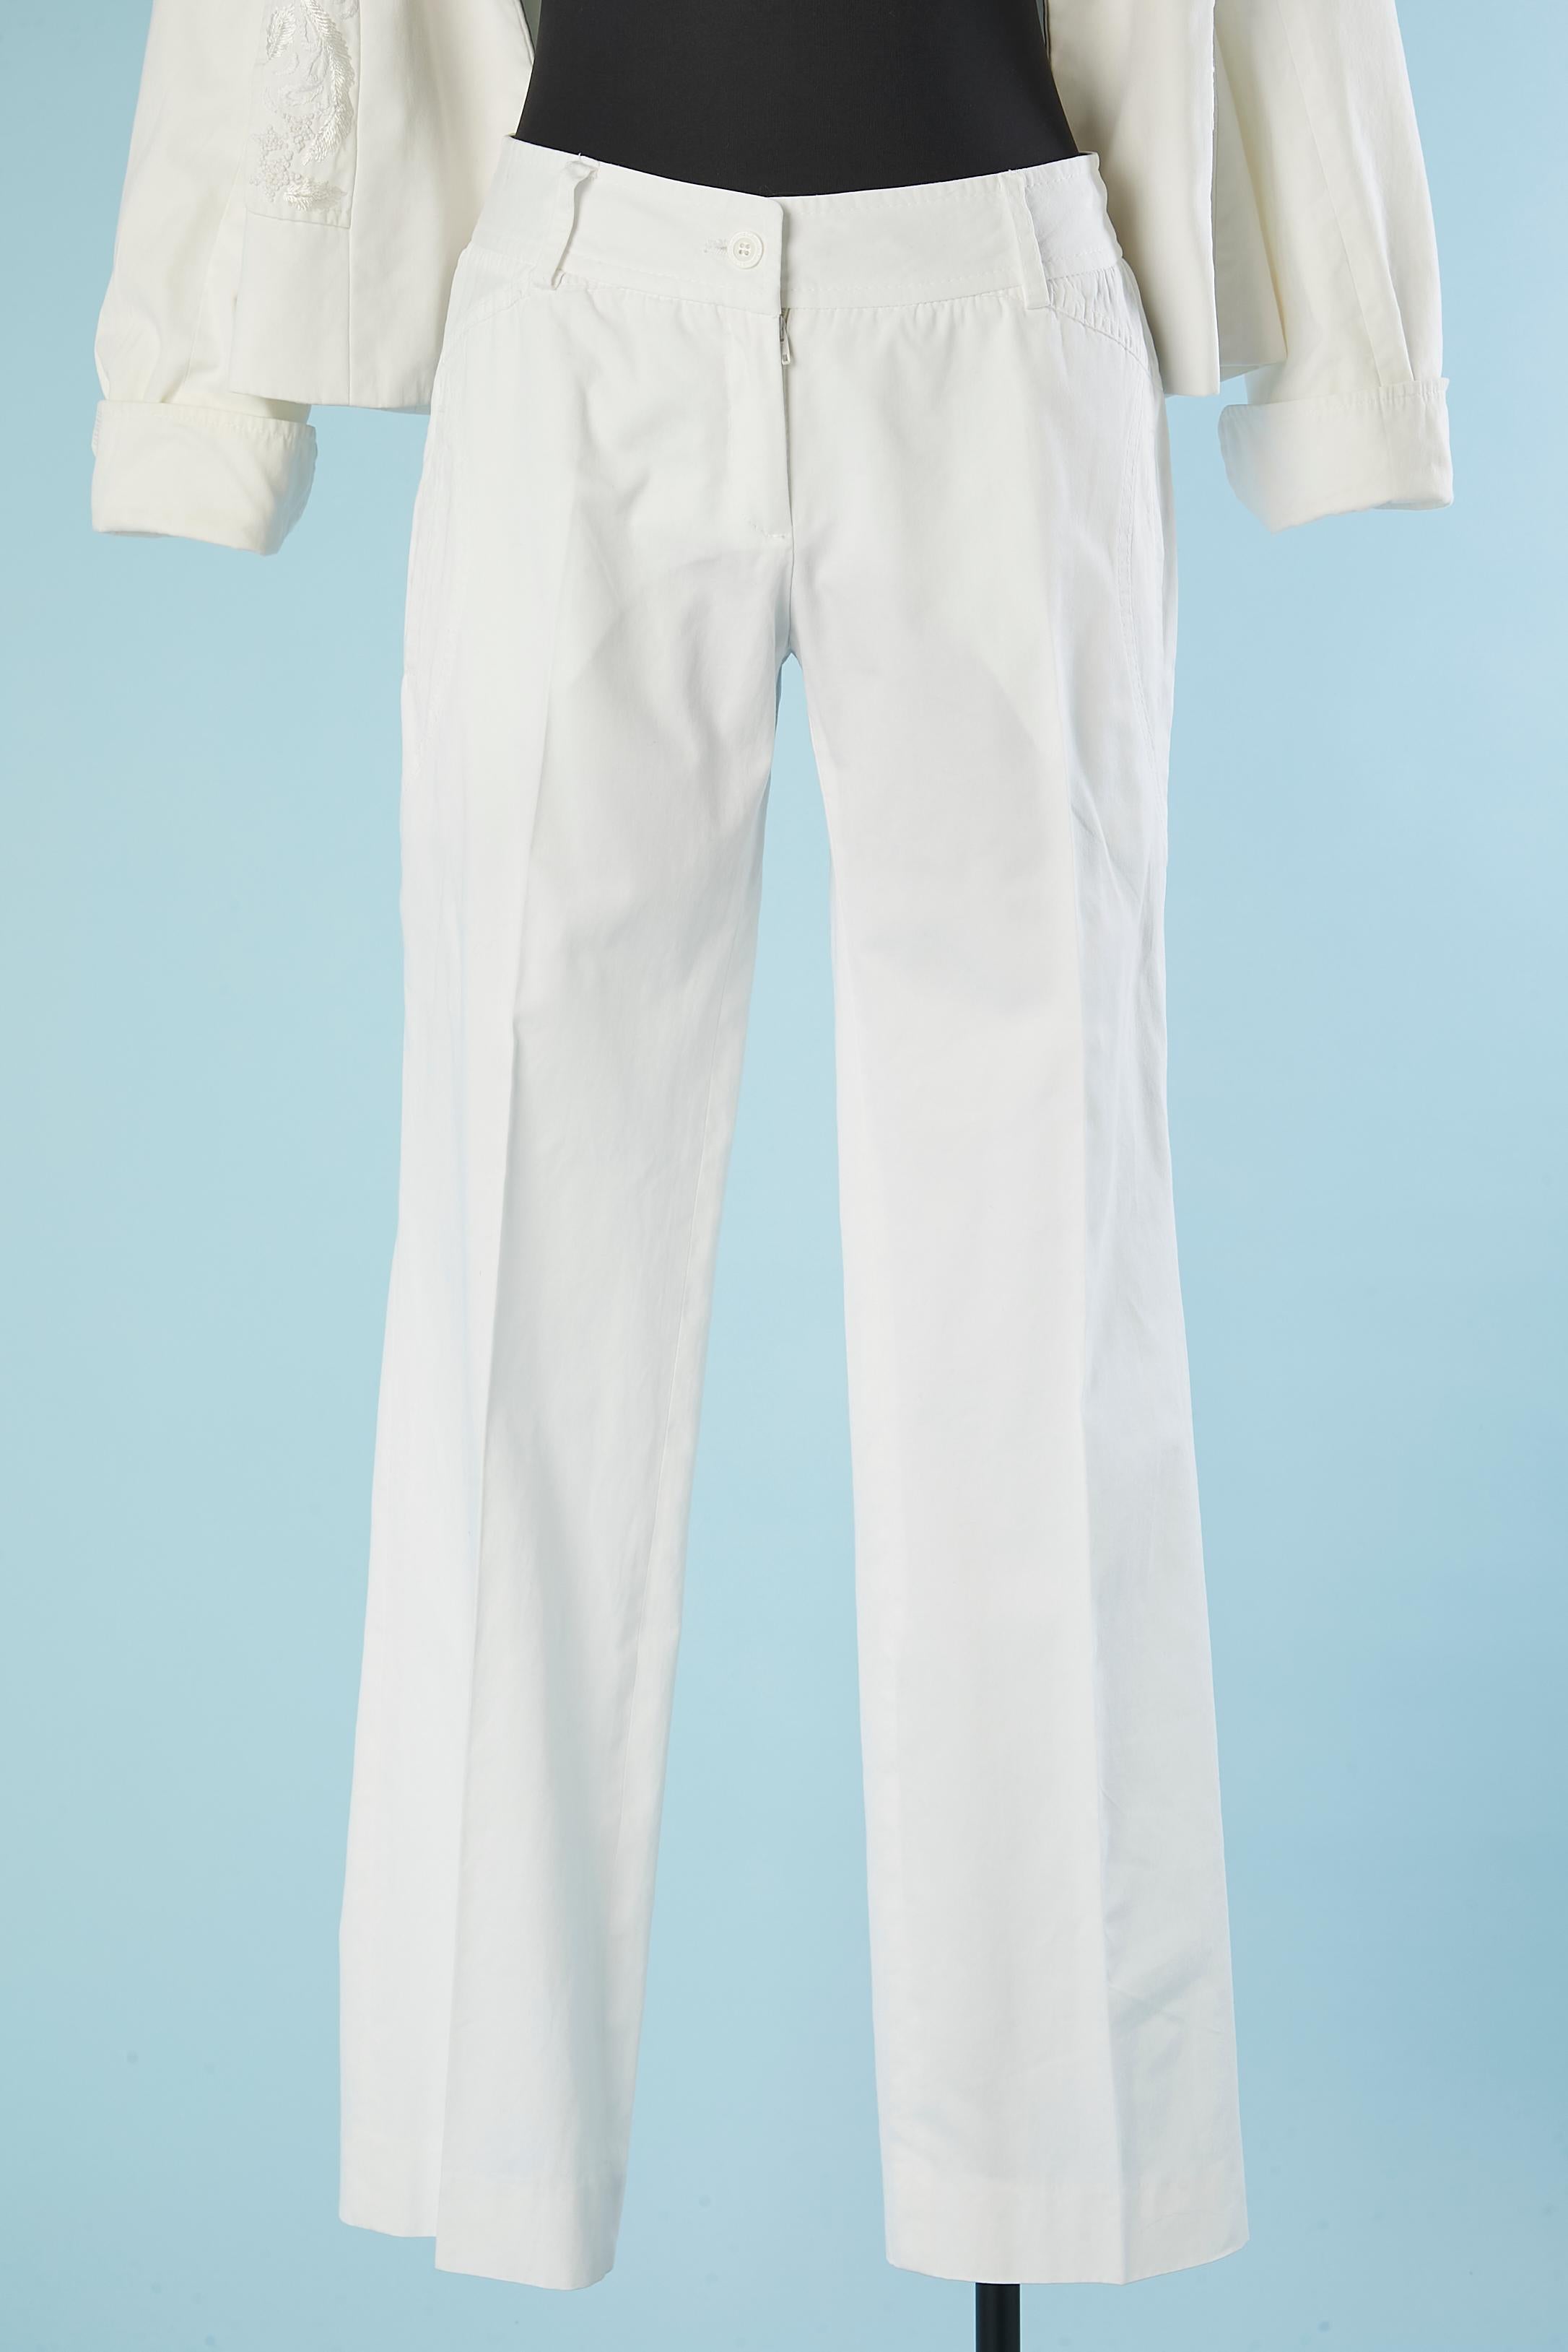 Trouser-suit in white cotton with embroideries on pockets Christian Lacroix For Sale 1